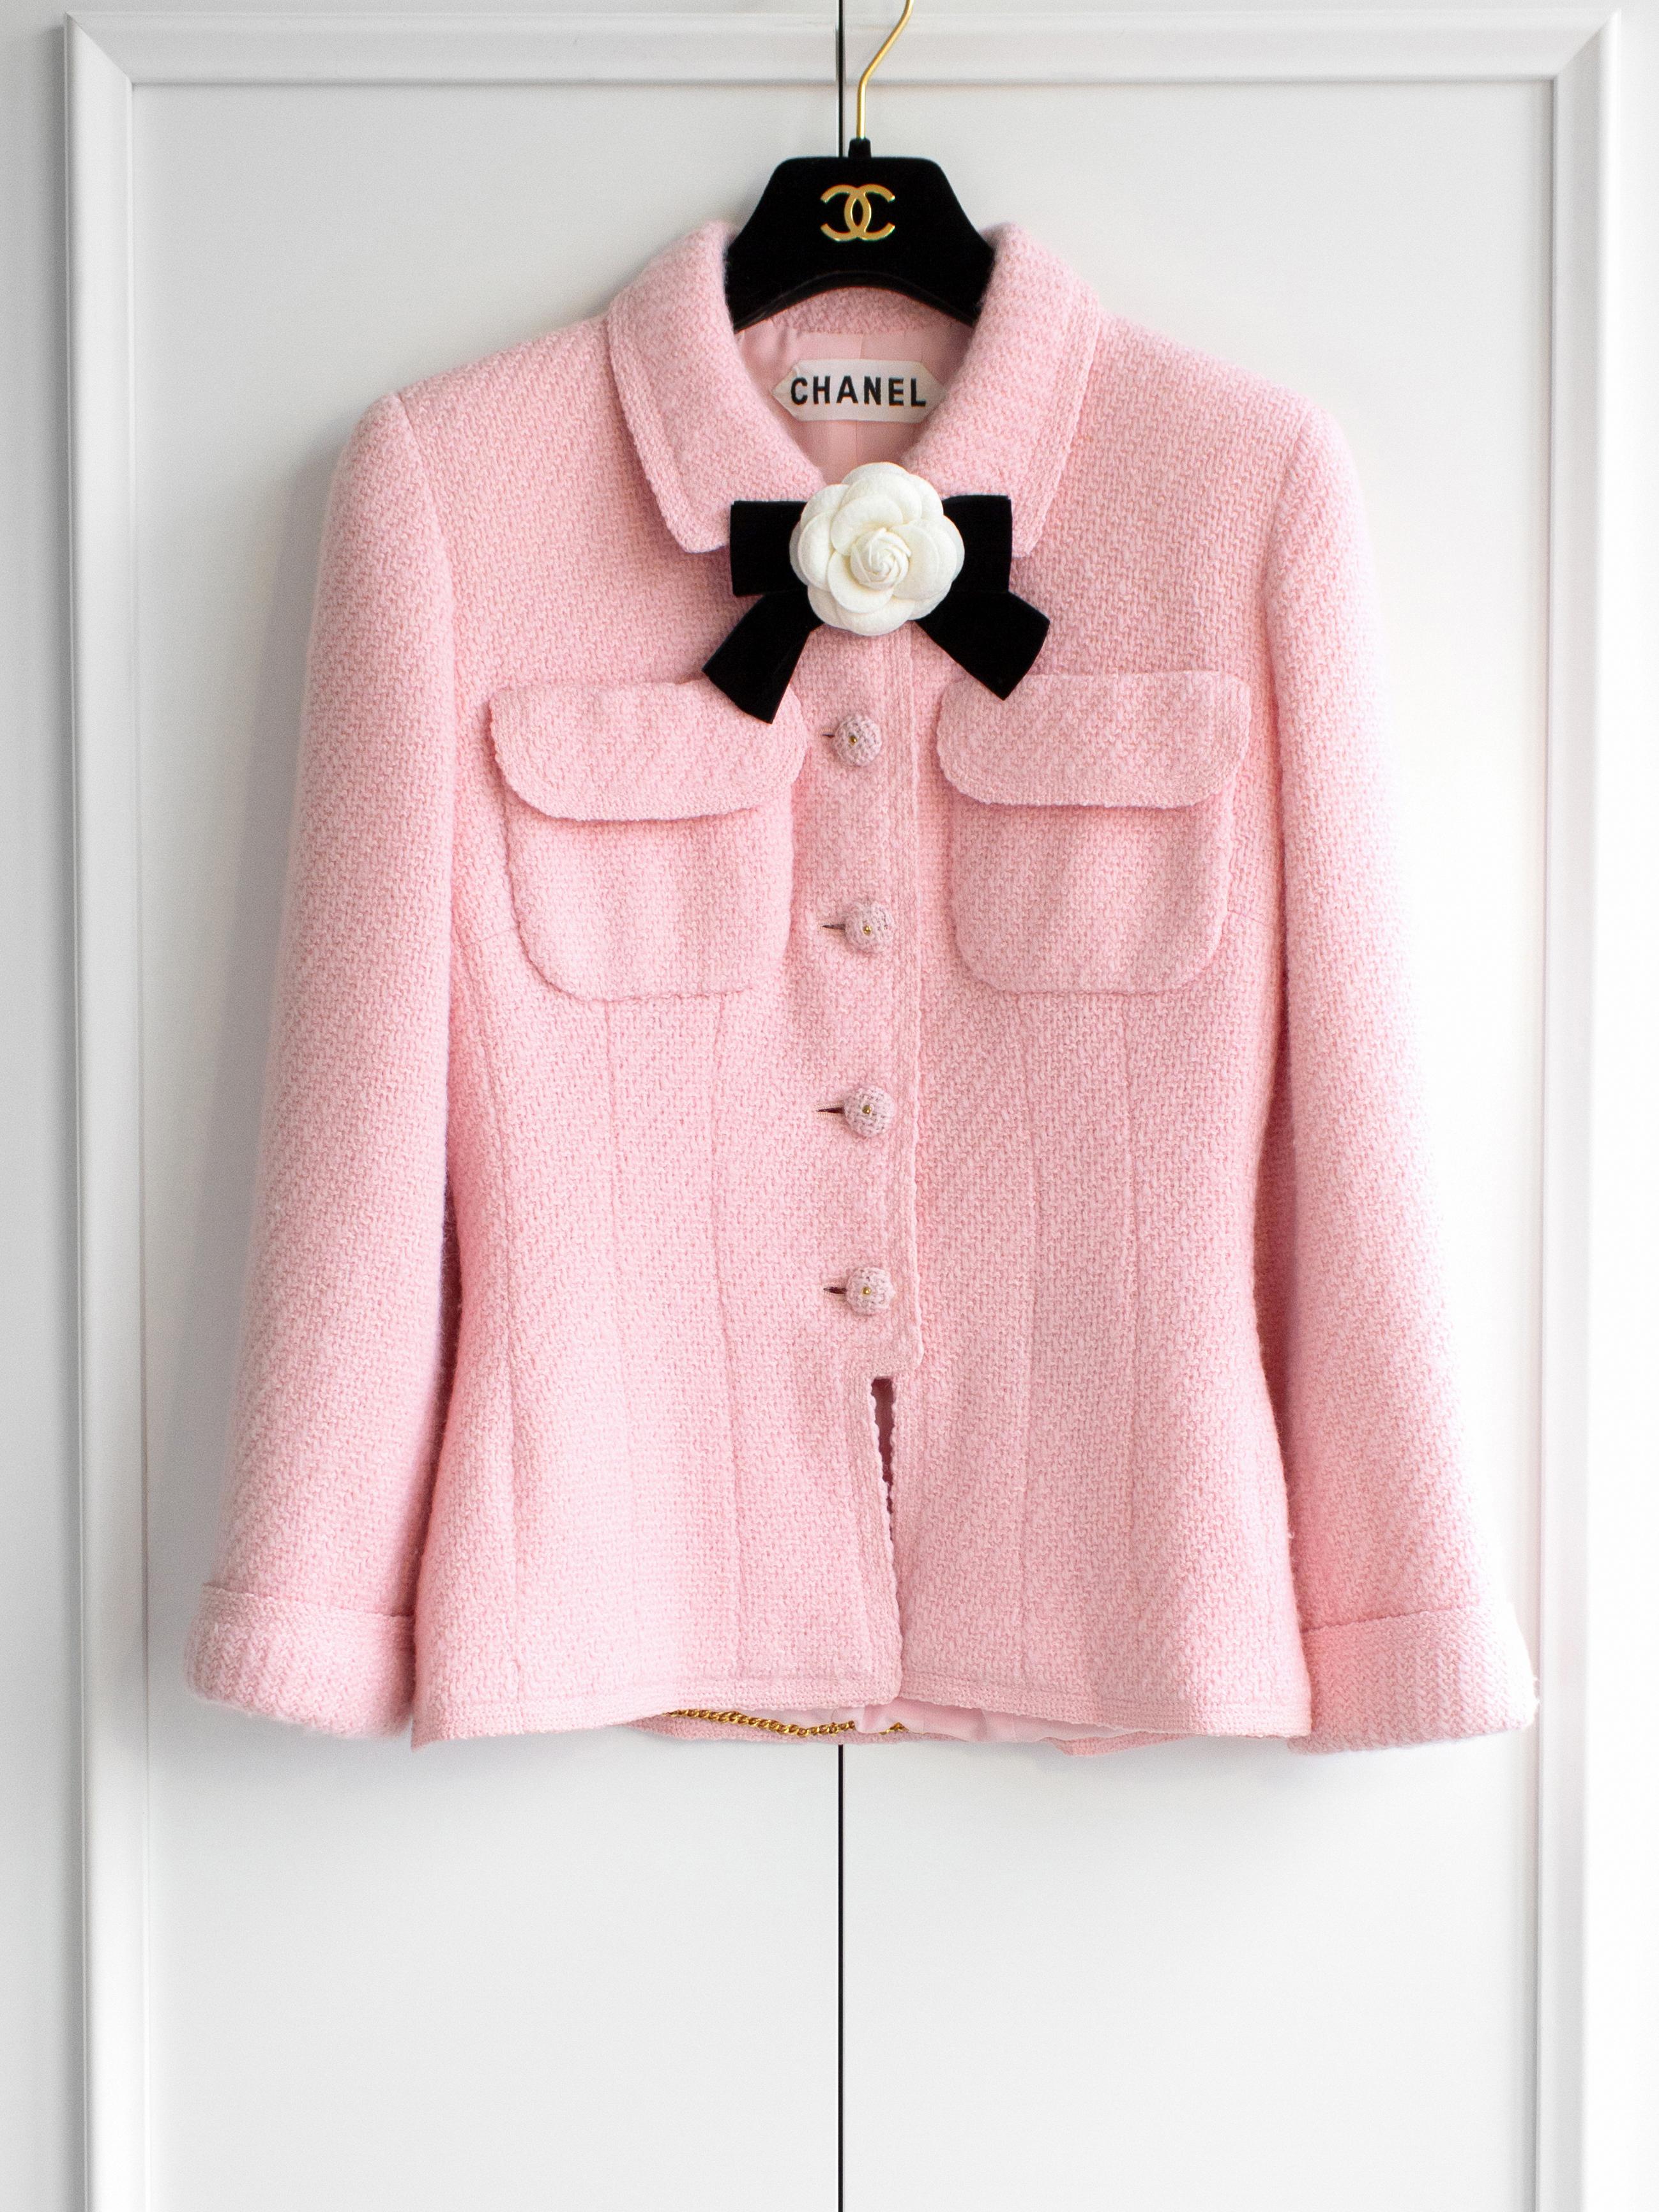 Chanel Vintage Spring/Summer 1995 Haute Couture Pink Tweed Jacket In Good Condition For Sale In Jersey City, NJ